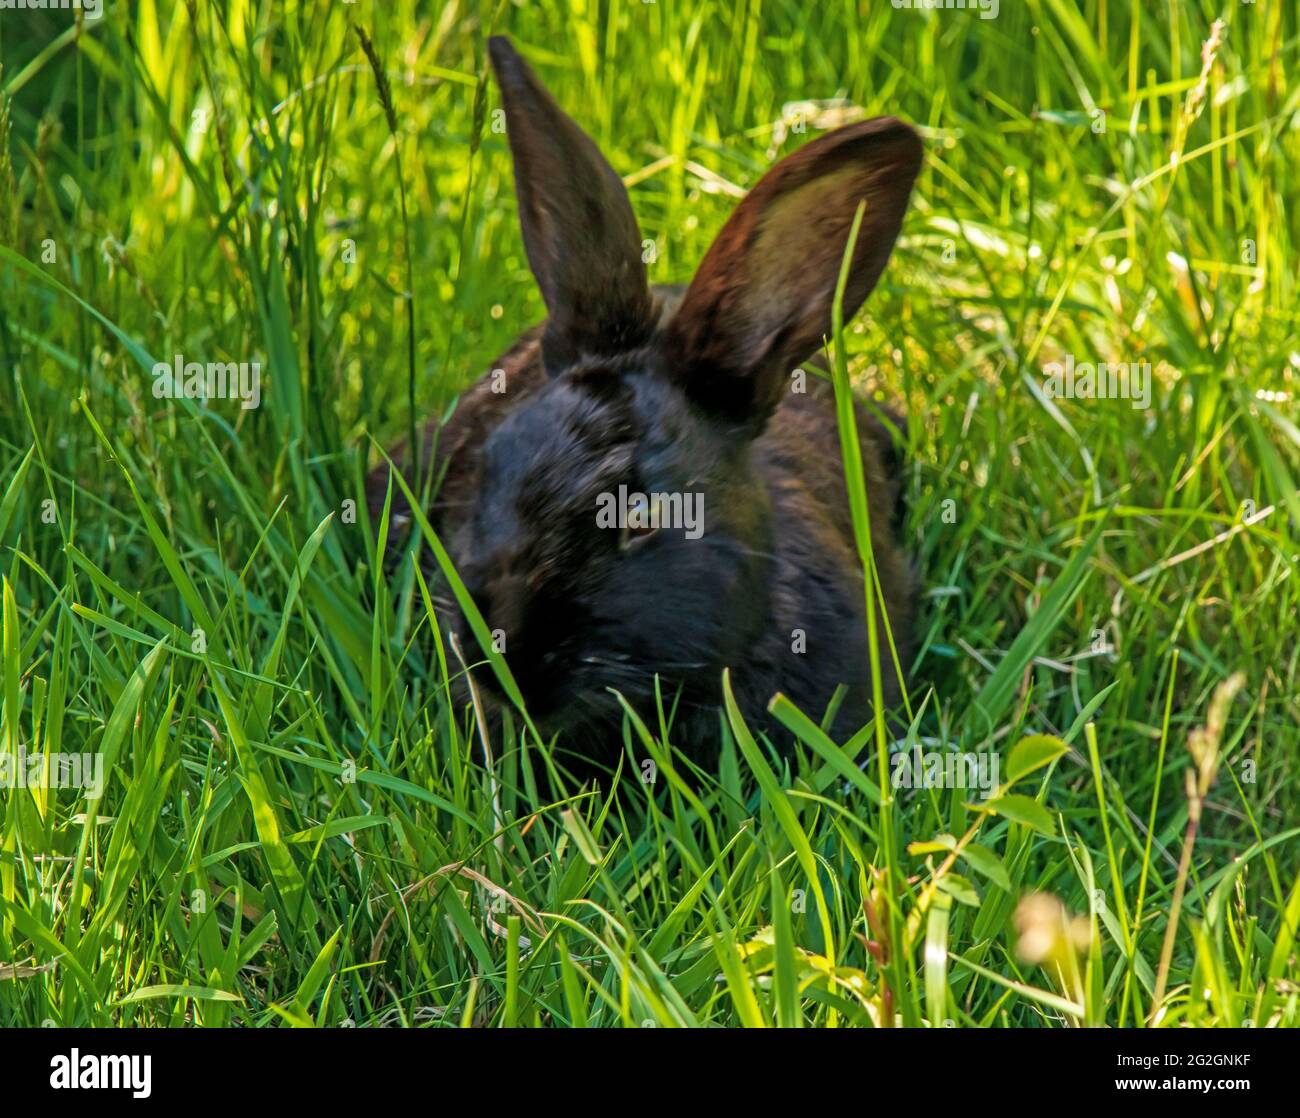 Black rabbit in tall green grass, eye contact, close up, sunny day. Stock Photo